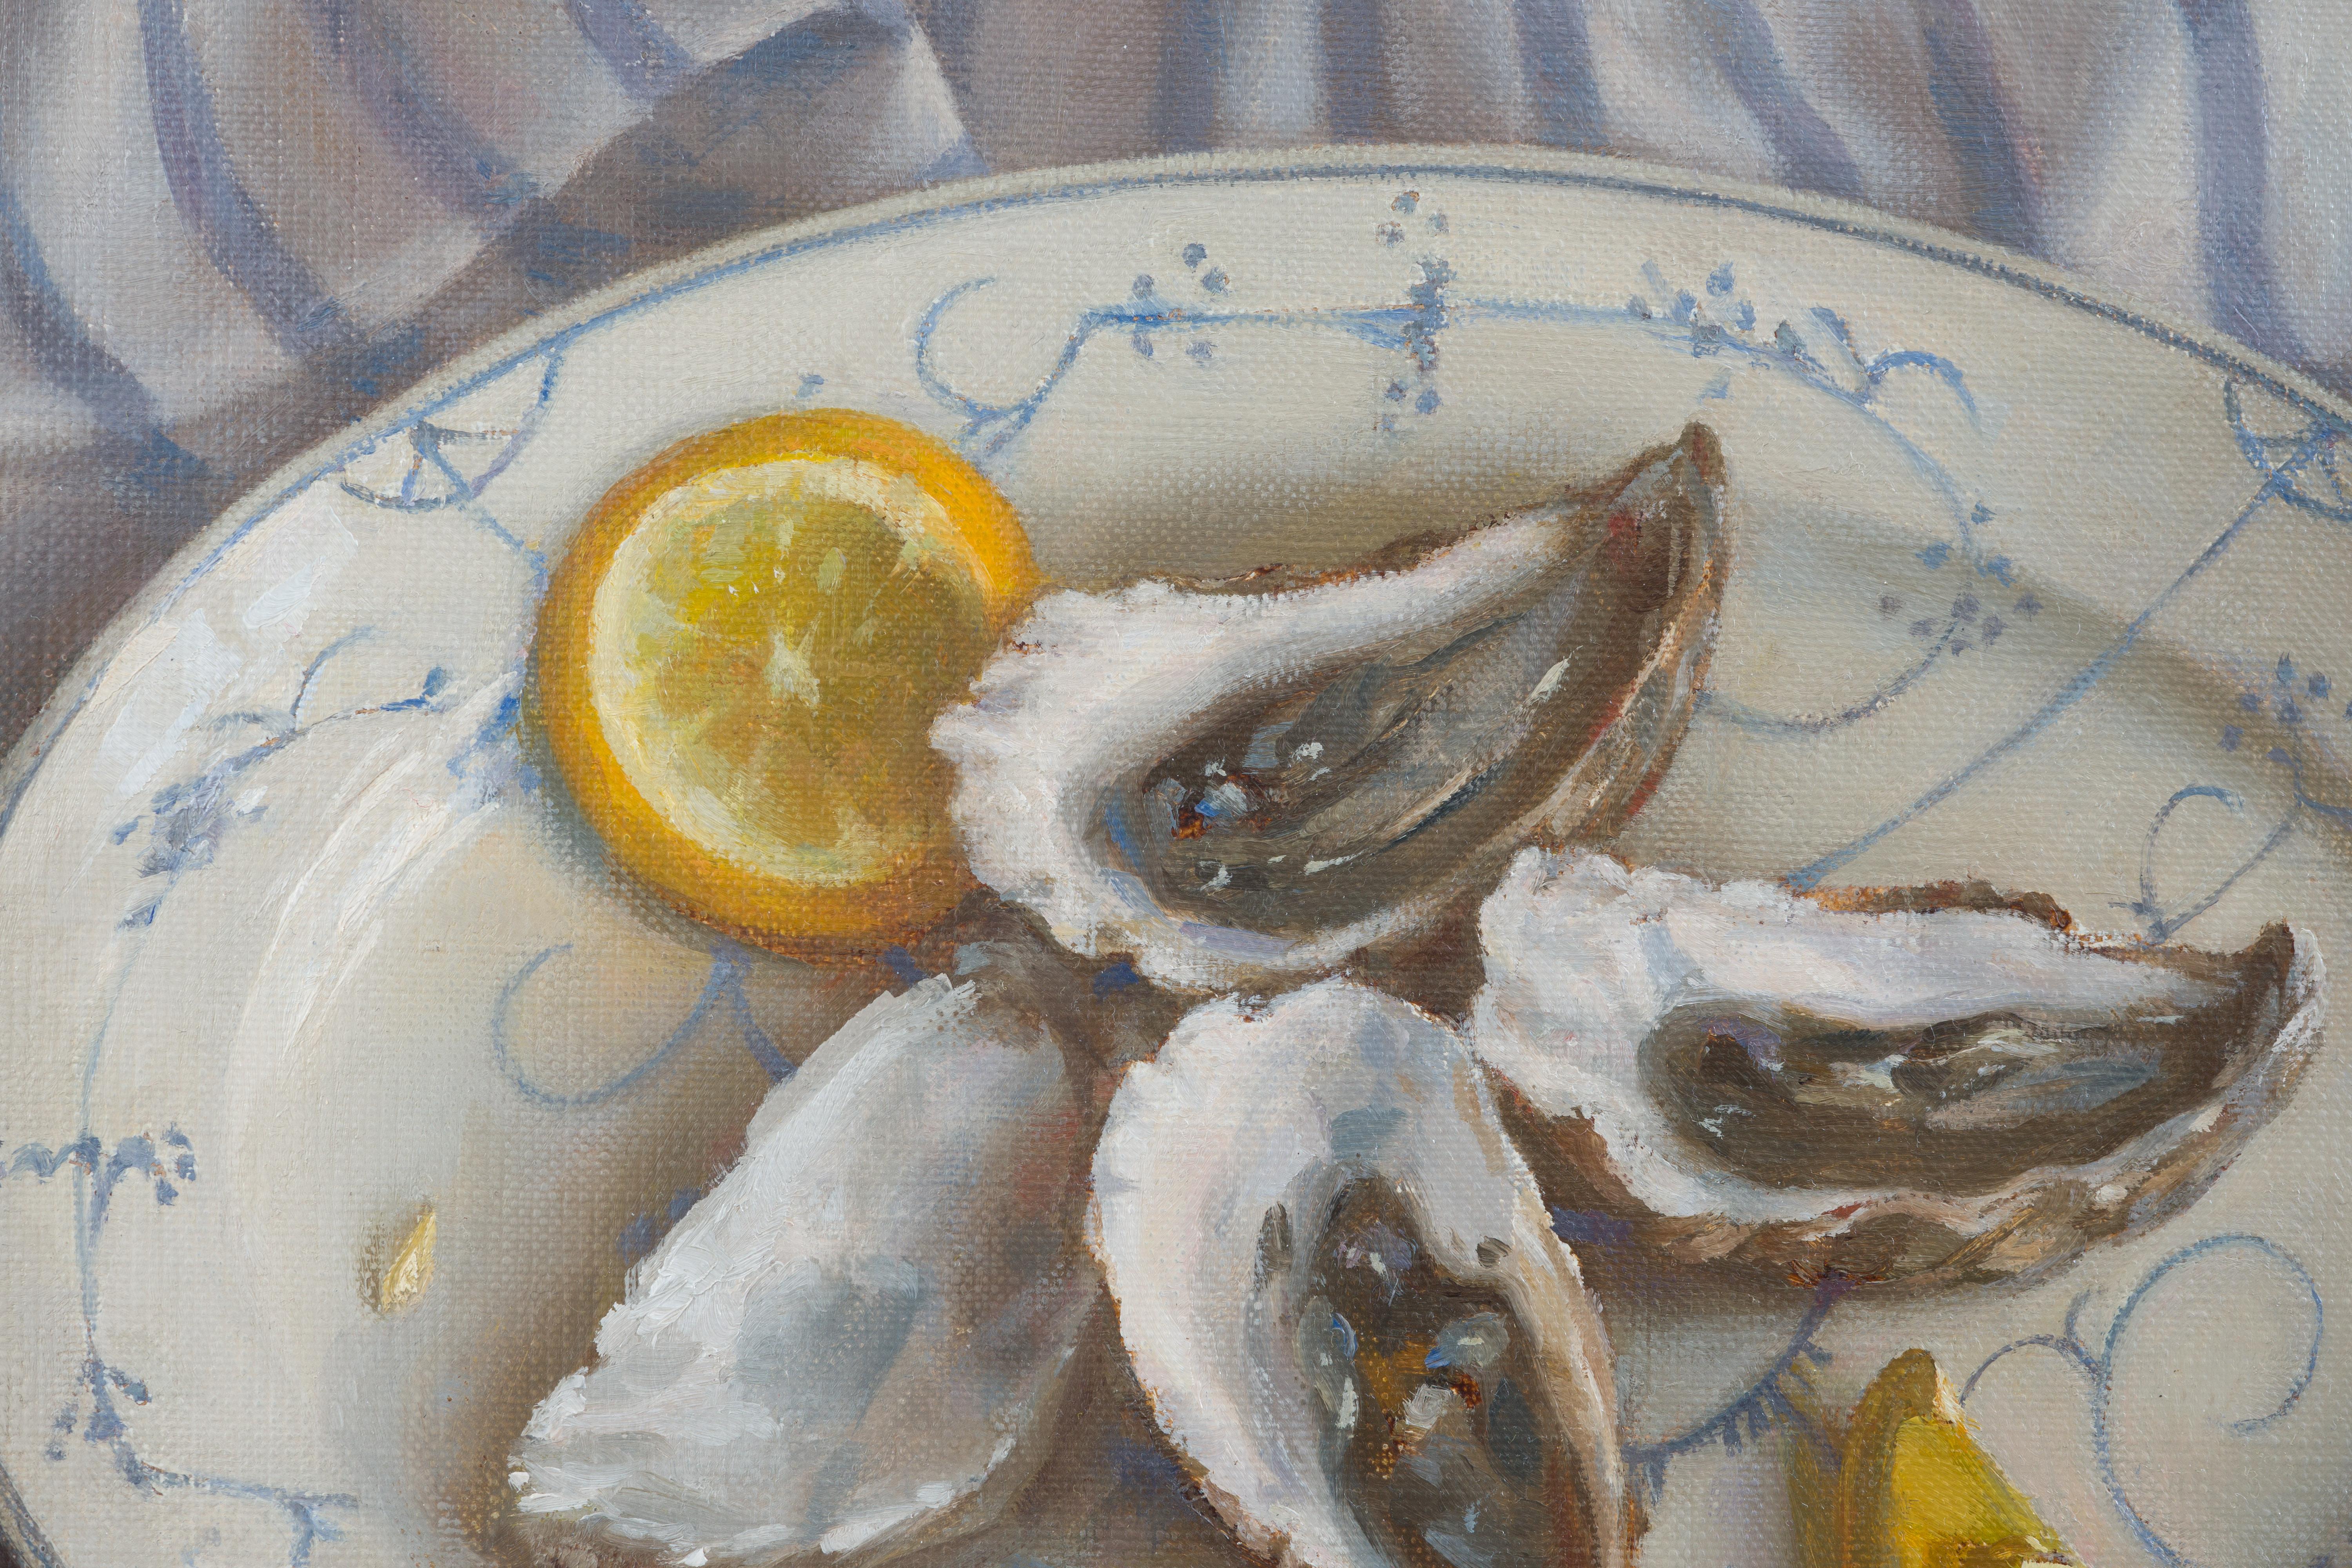 Oysters with blue striped drapery - Realist Painting by Irina Trushkova